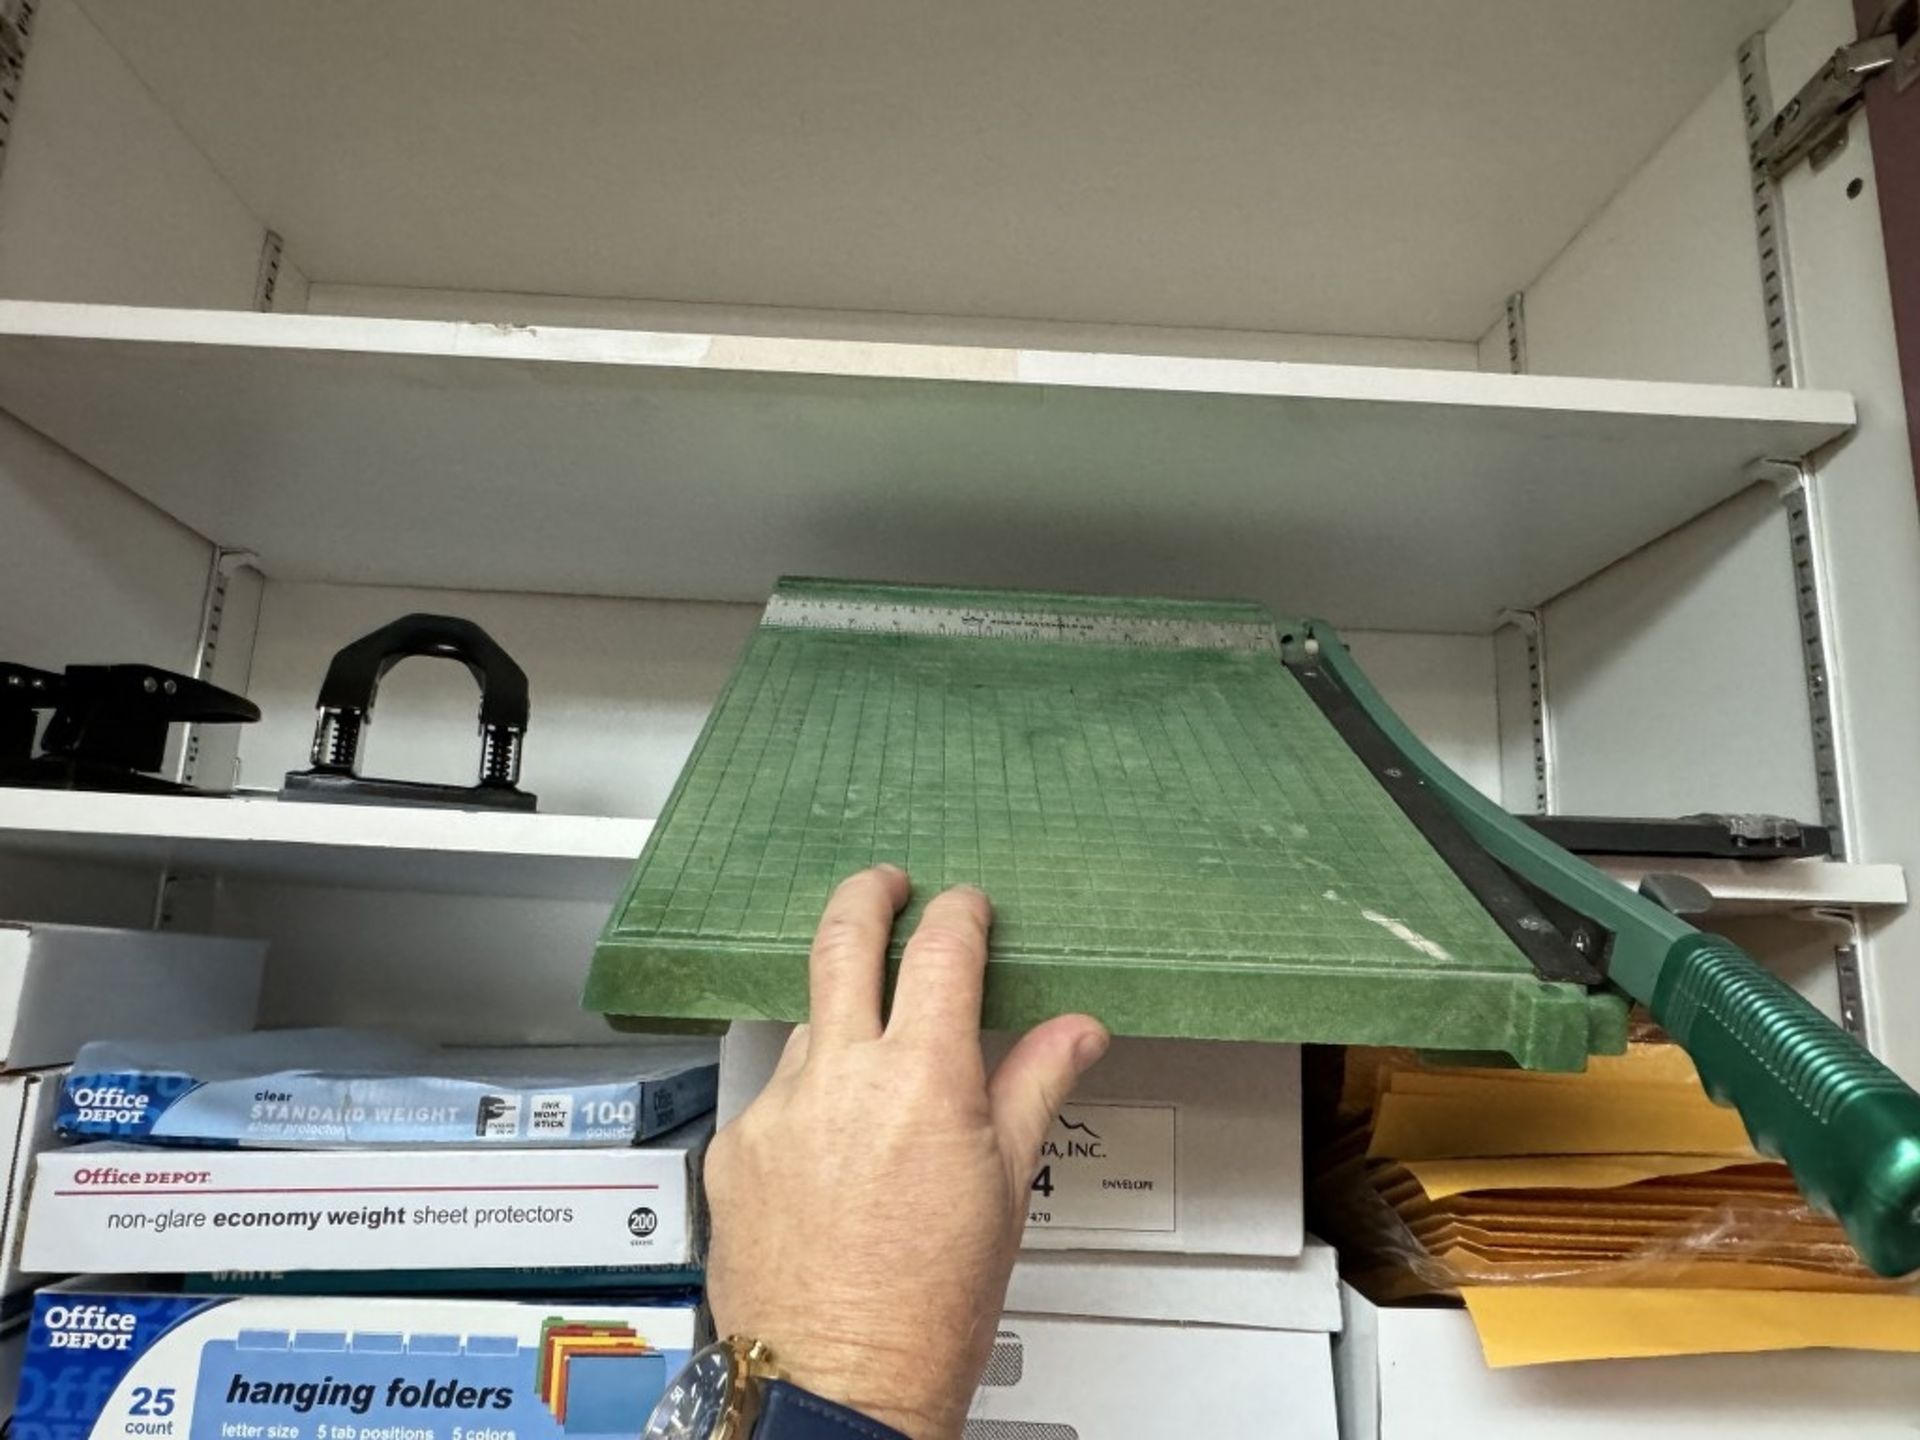 LOT CONSISTING OF STATIONARY, ENVELOPES, FOLDERS, - Image 2 of 2